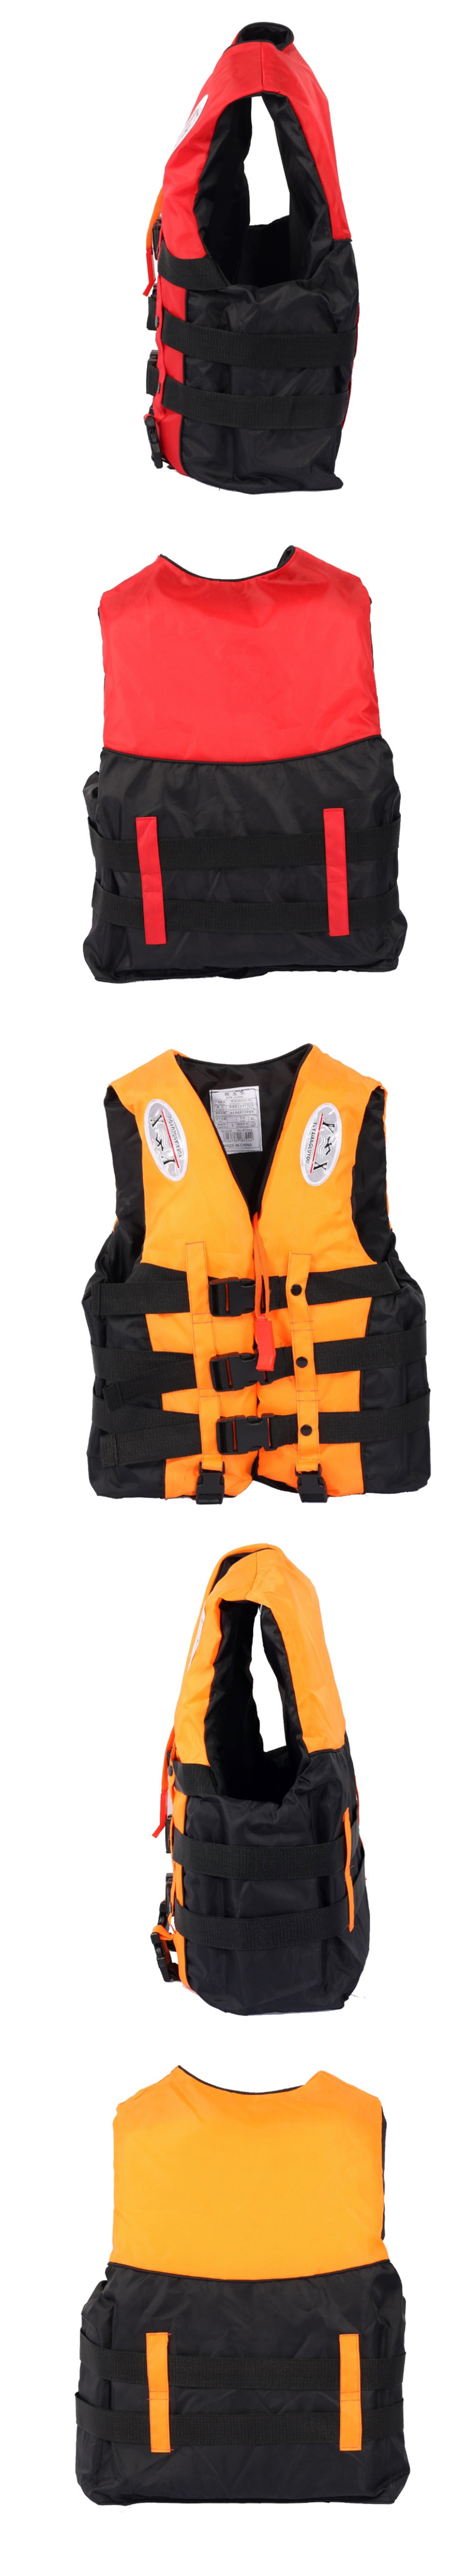 OWLWIN-Universal-Outdoor--Life-Jacket-Swimming-Boating-Skiing-Driving-Vest-Survival-Suit-for-Adult-C-1729345-3